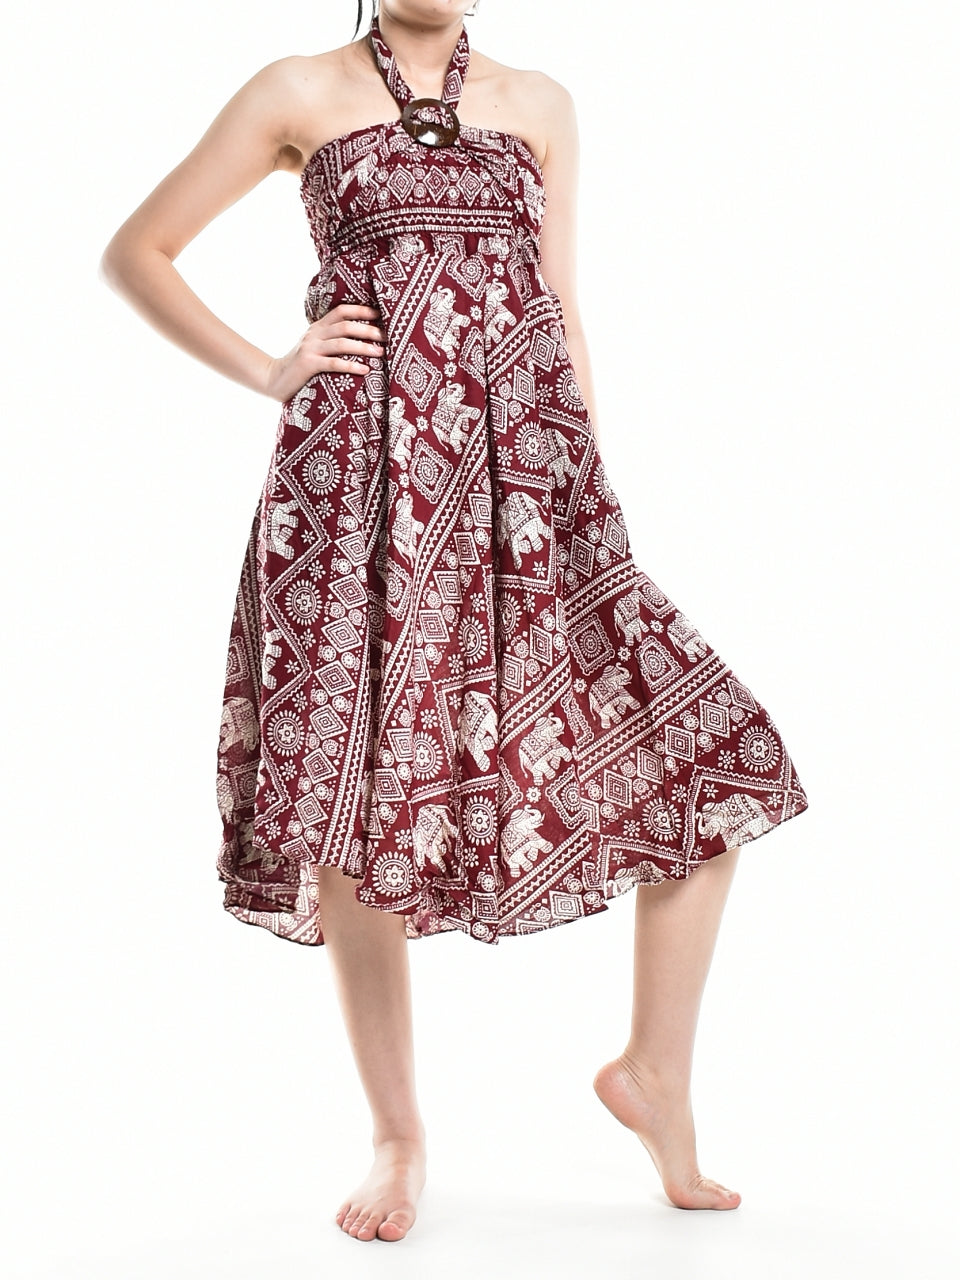 Bohotusk Red Elephant Print Long Skirt With Coconut Buckle (& Strapless Dress) S/M Only